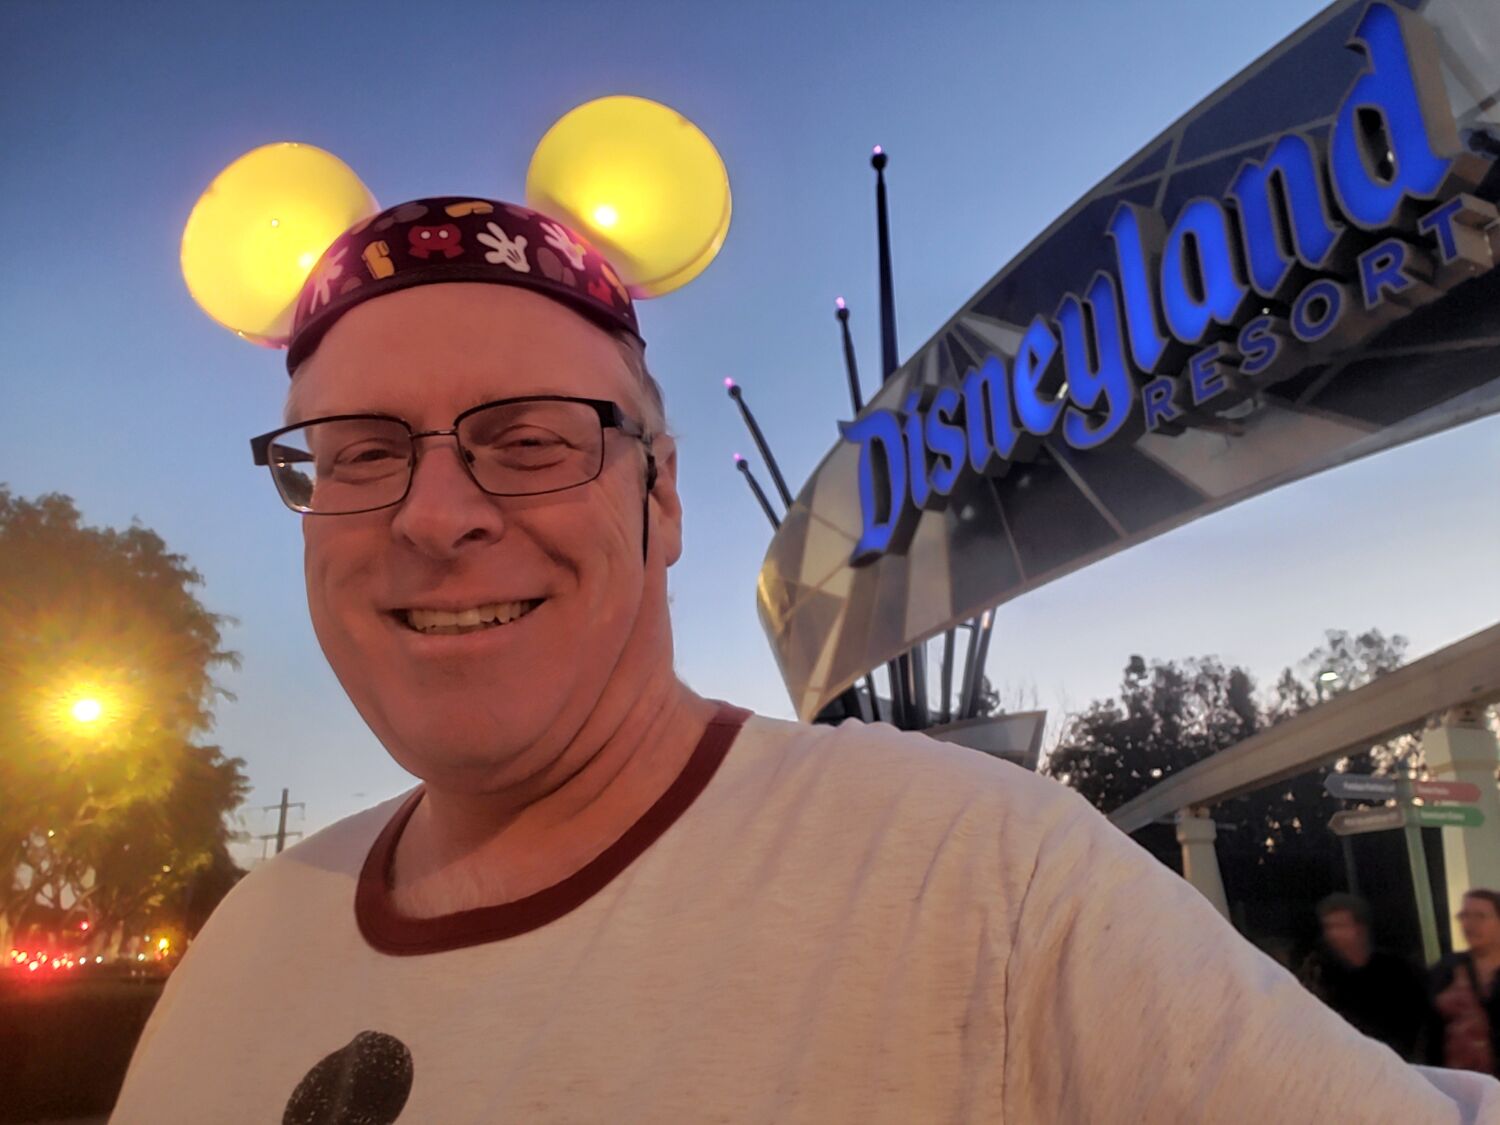 Think you like Disneyland? This fan visited the park 2,995 days in a row — a new world record